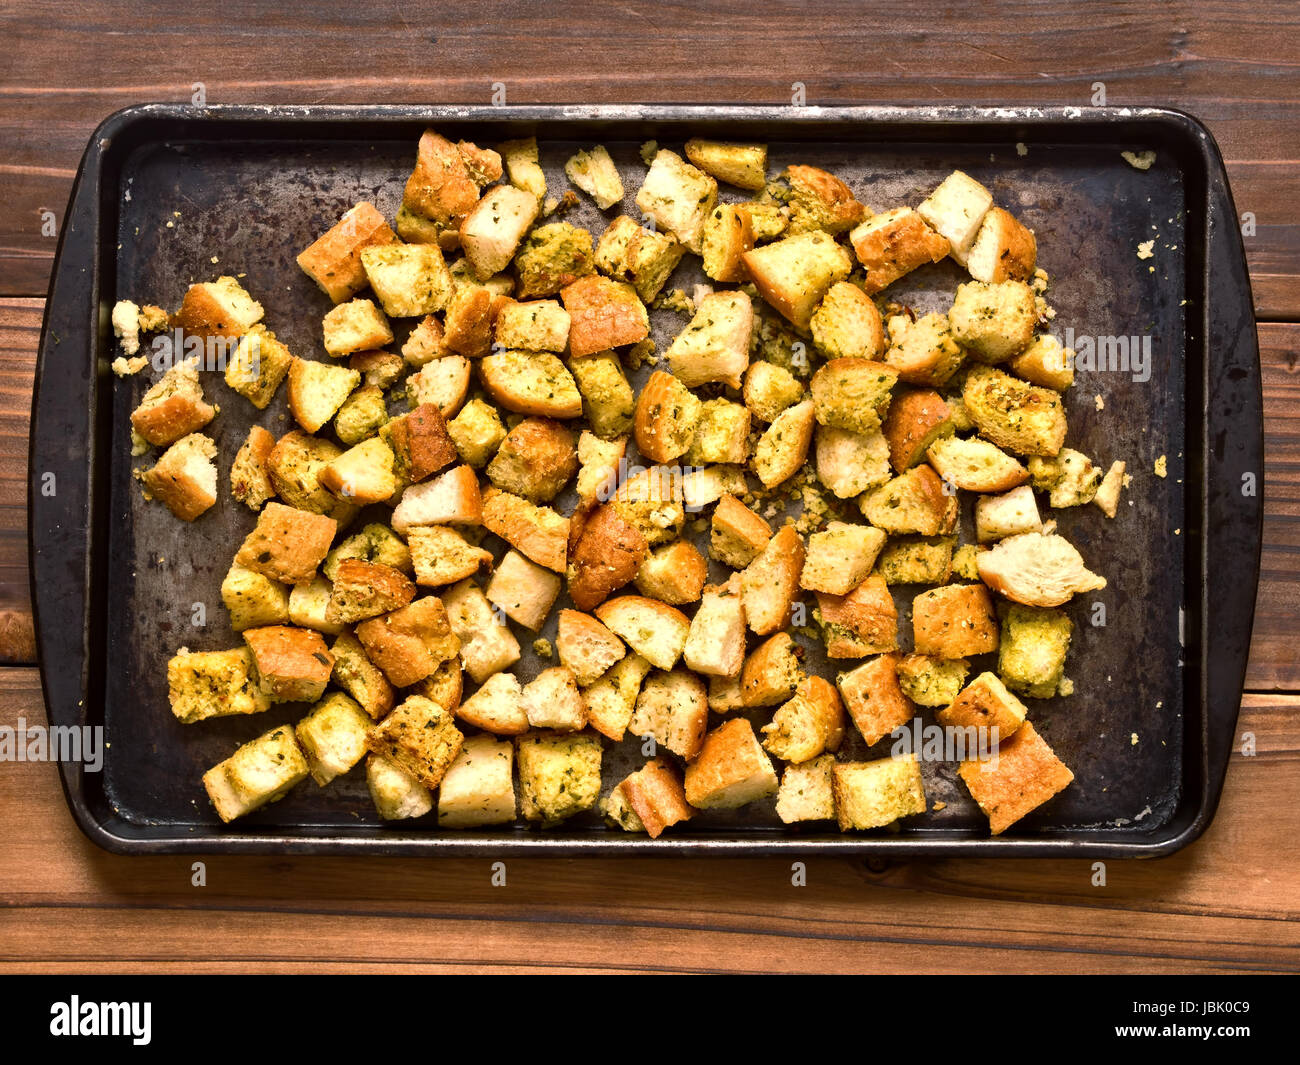 close up of a tray of rustic homemade baked croutons Stock Photo